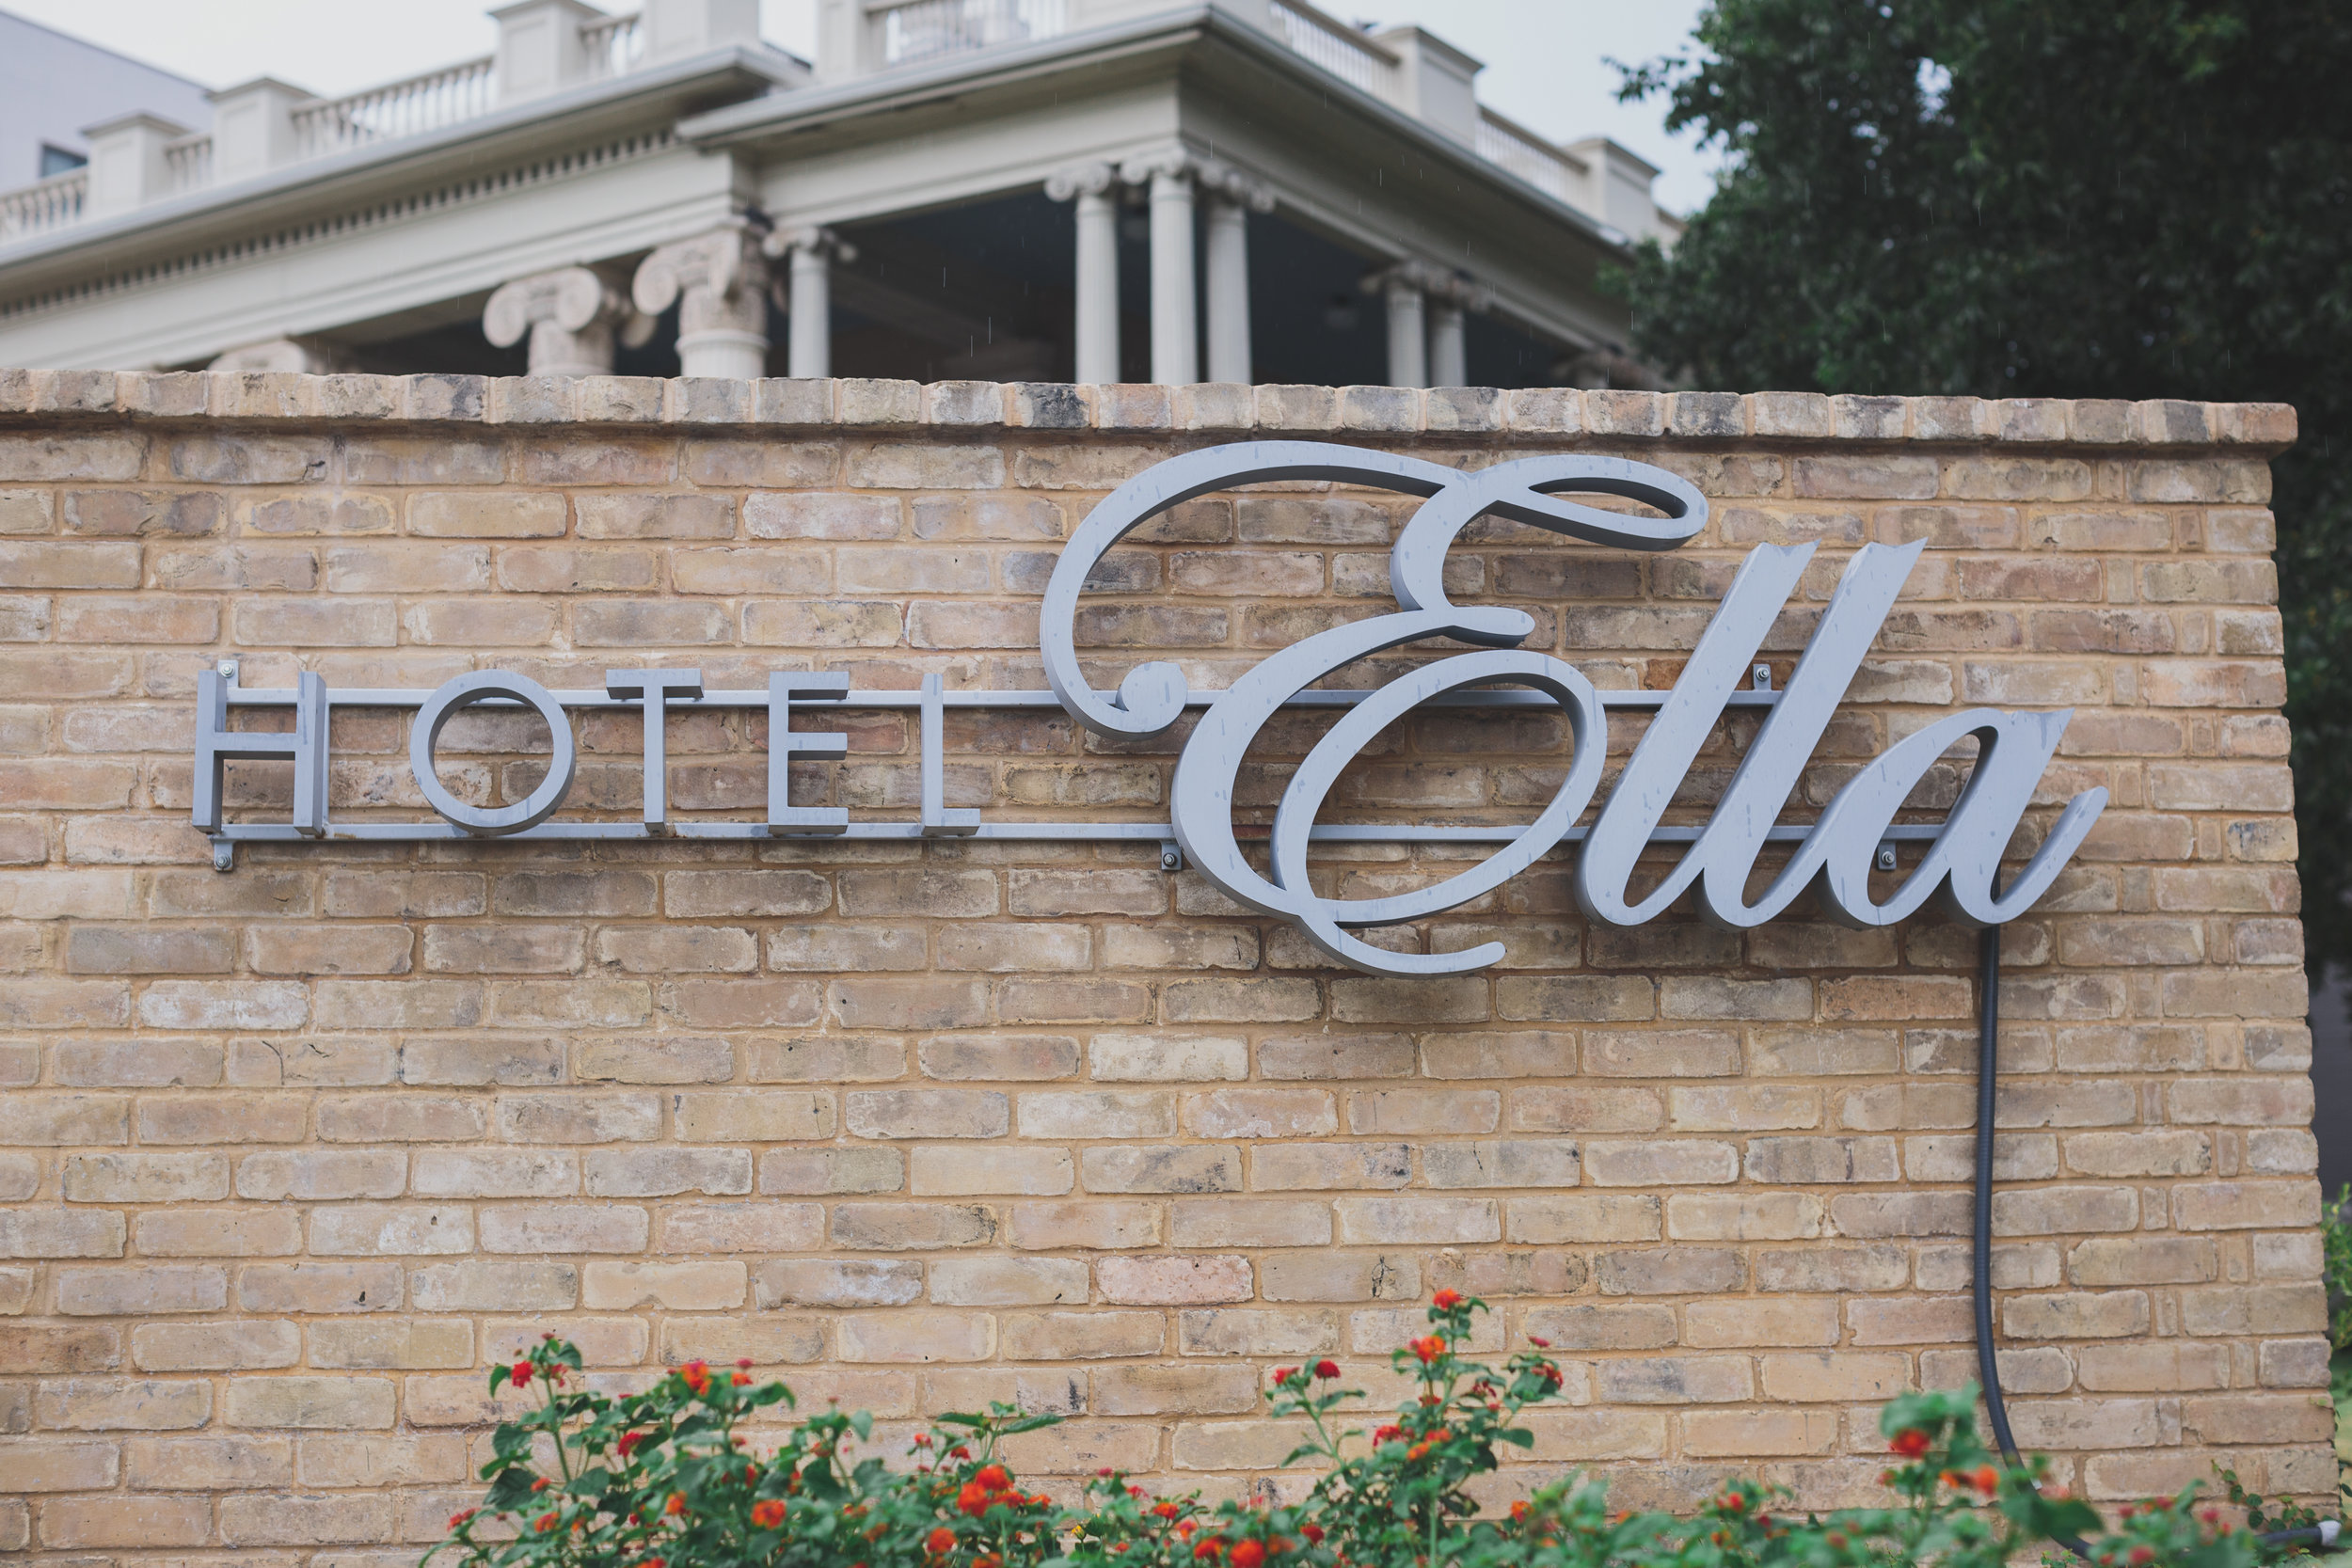 kelly costello photography, where to stay in austin, texas, hotel ella, UT, mumm napa, wedding, austin bachelorette party, drinking buddies, painted wine glasses, lovers and friends romper